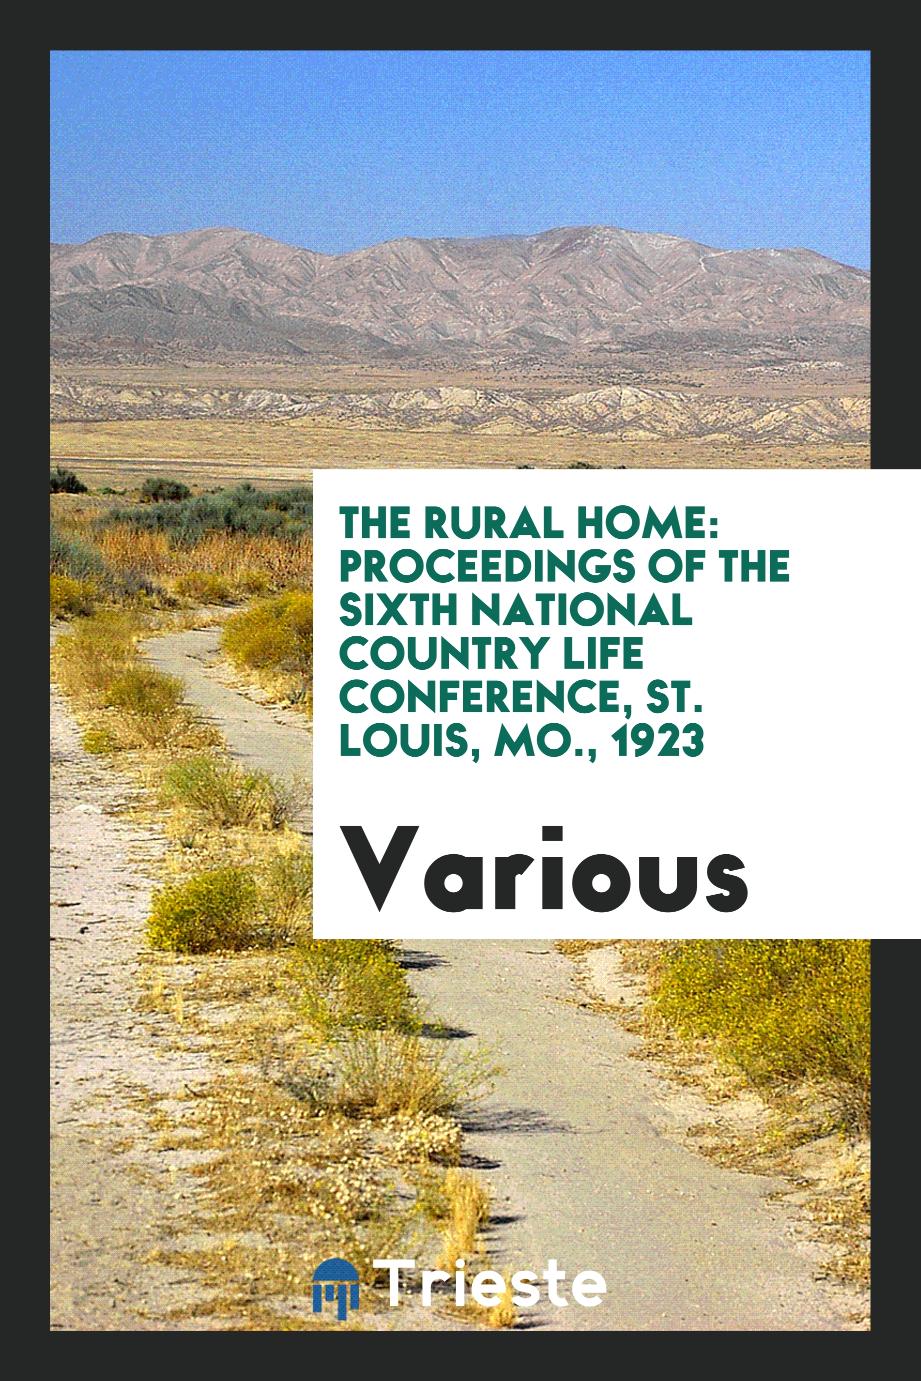 The rural home: proceedings of the sixth National Country Life Conference, St. Louis, Mo., 1923